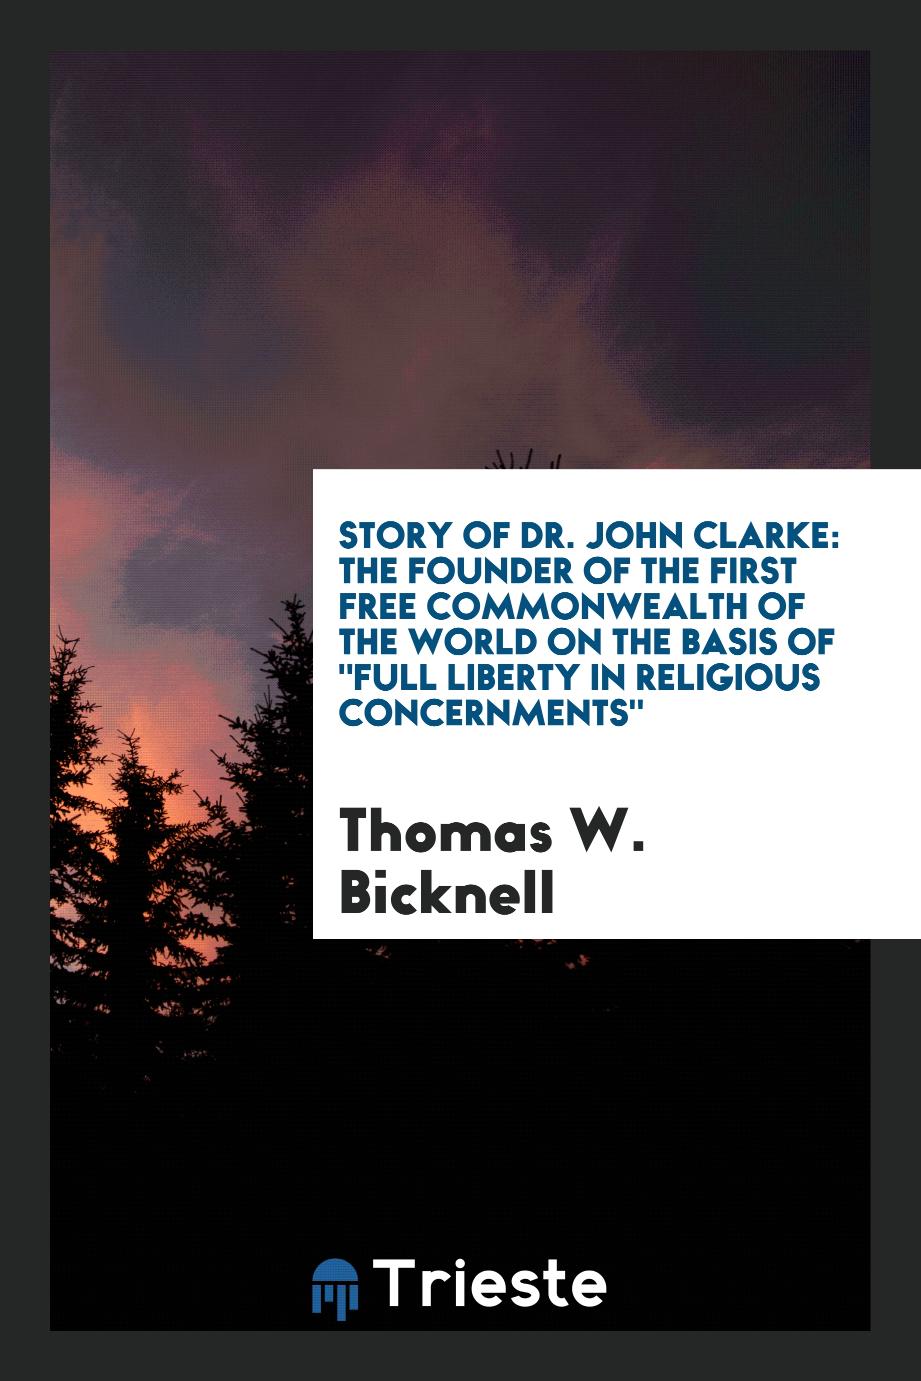 Story of Dr. John Clarke: the founder of the first free commonwealth of the world on the basis of "full liberty in religious concernments"